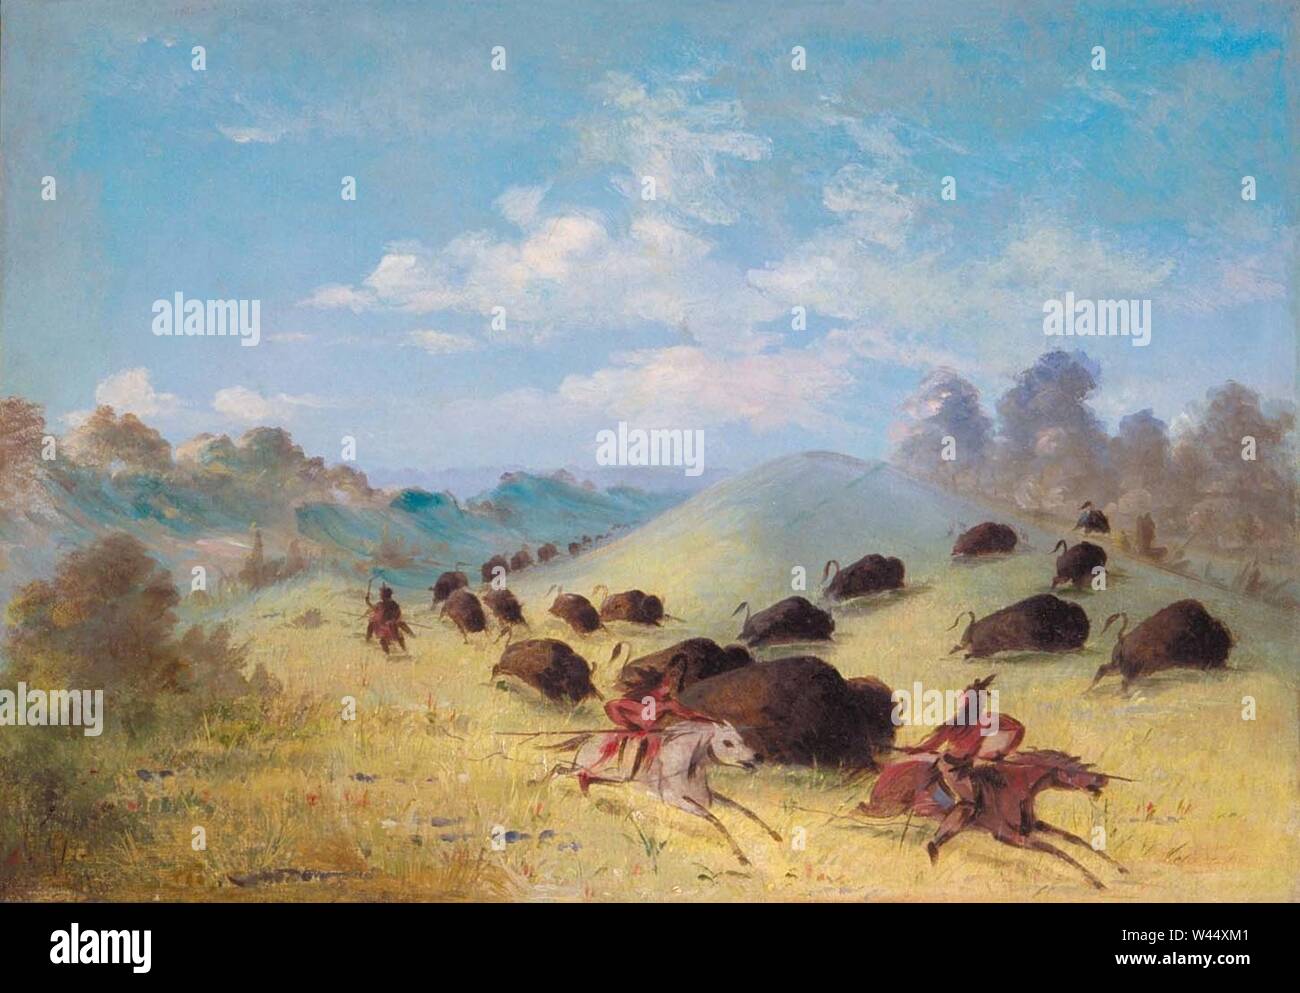 Comanche Indians Chasing Buffalo with Lances and Bows. Stock Photo